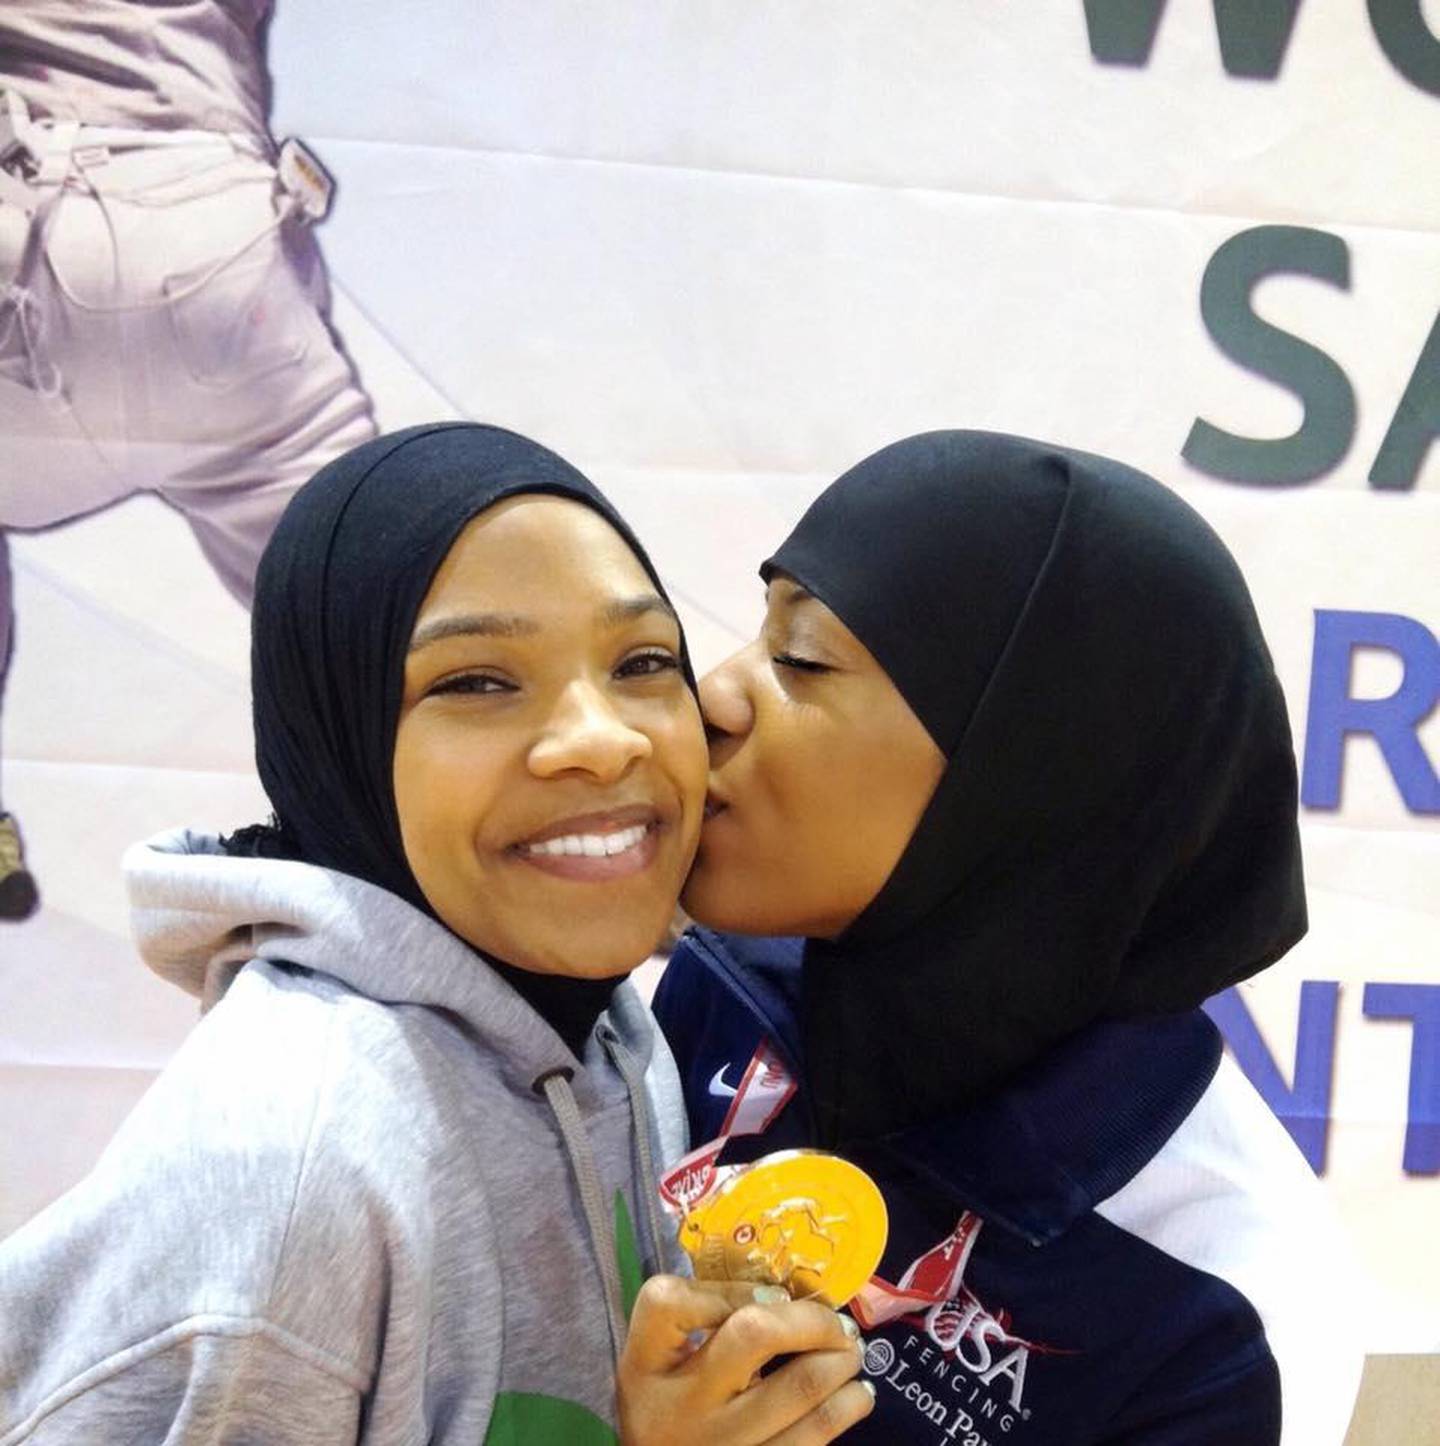 Muhammad's sister Faizah gives her a congratulatory kiss after a competition. 